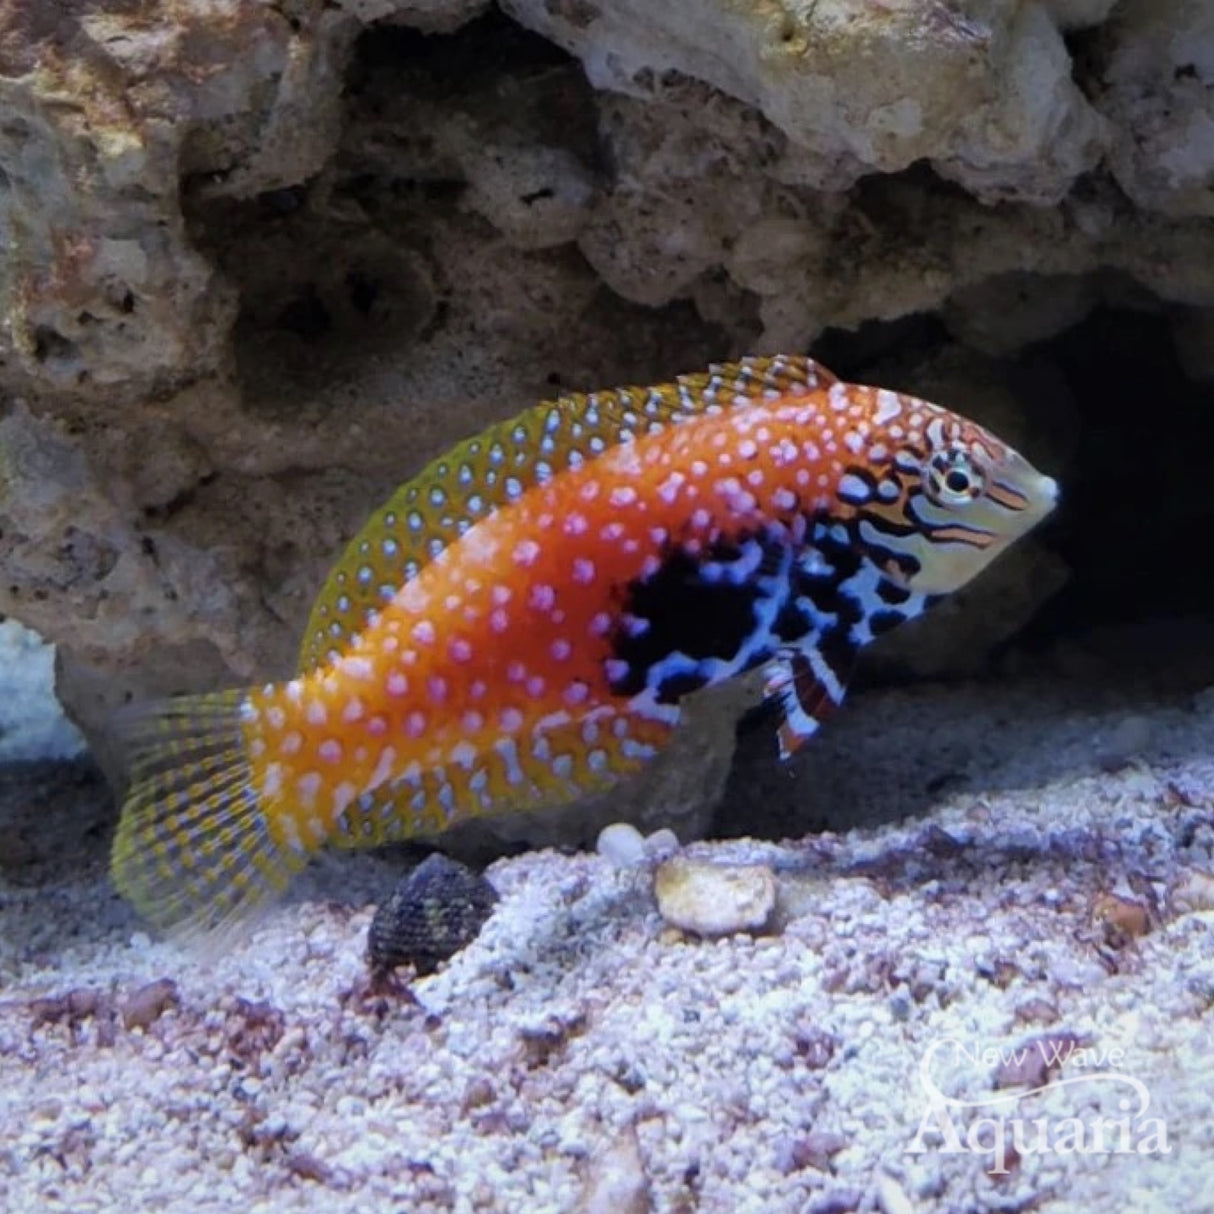 Super Star Of The Reef: The Blue Star Leopard Wrasse